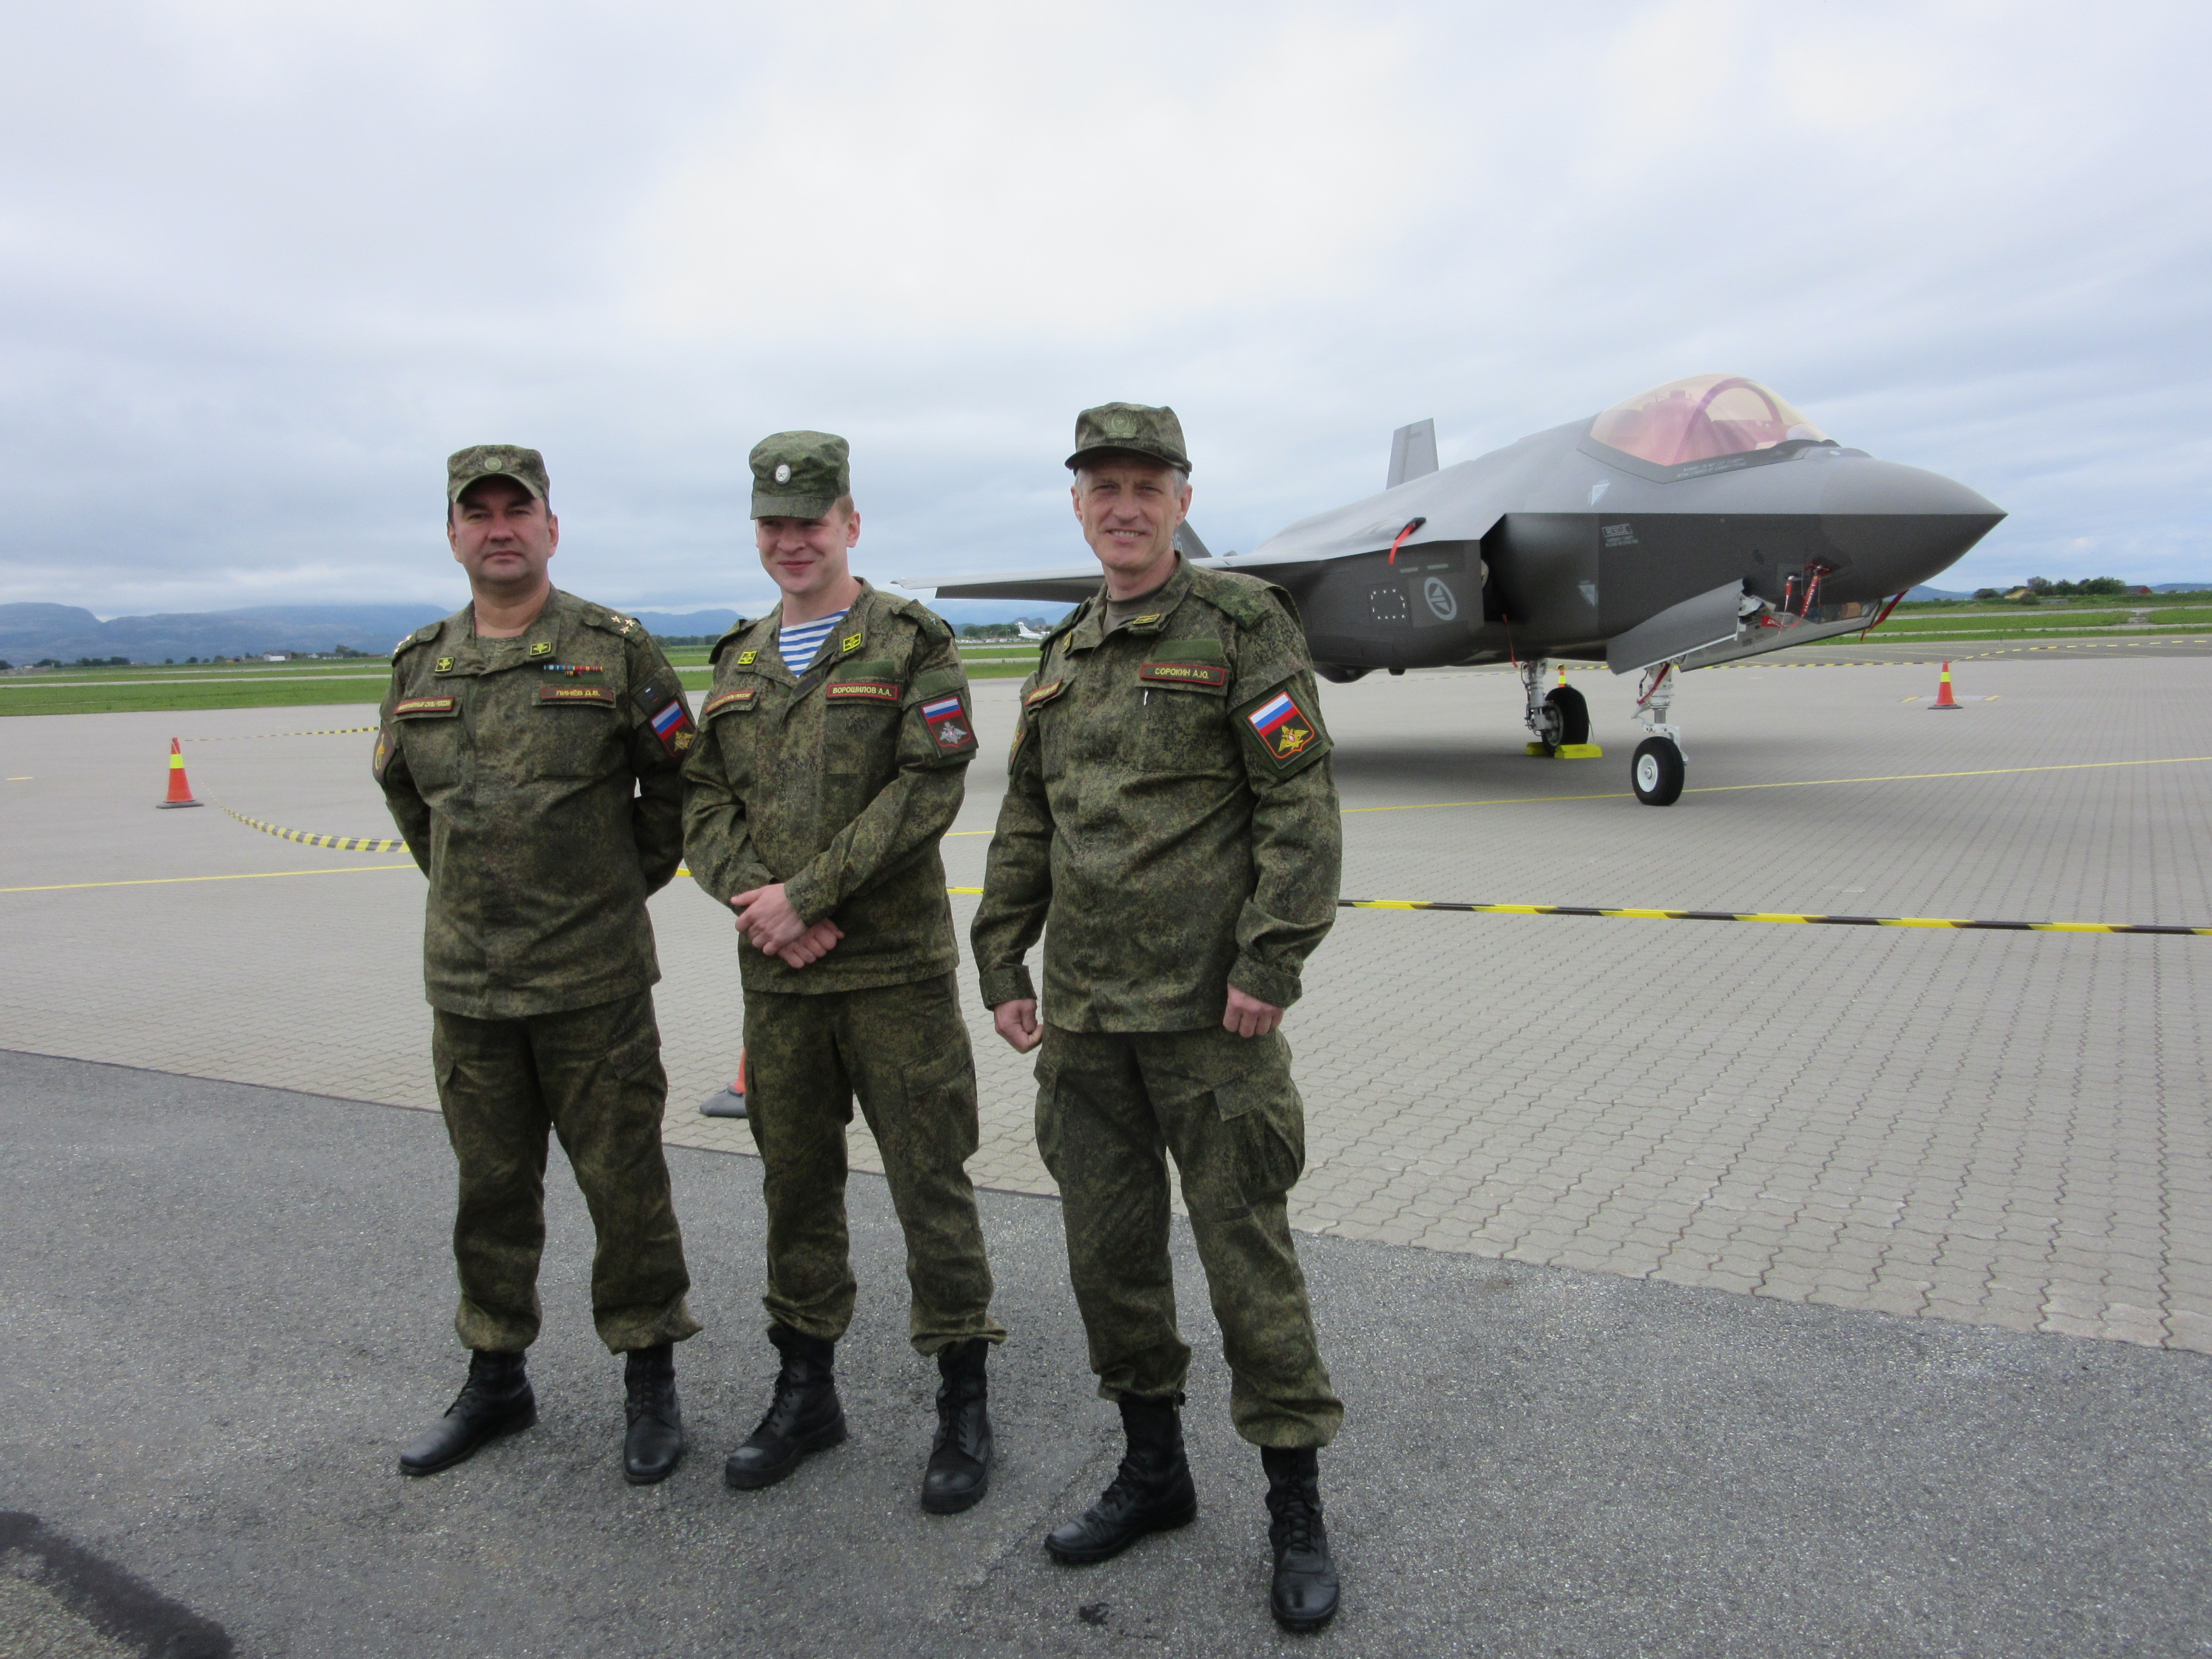 Three Russian officers posing in front of a Norwegian F-35